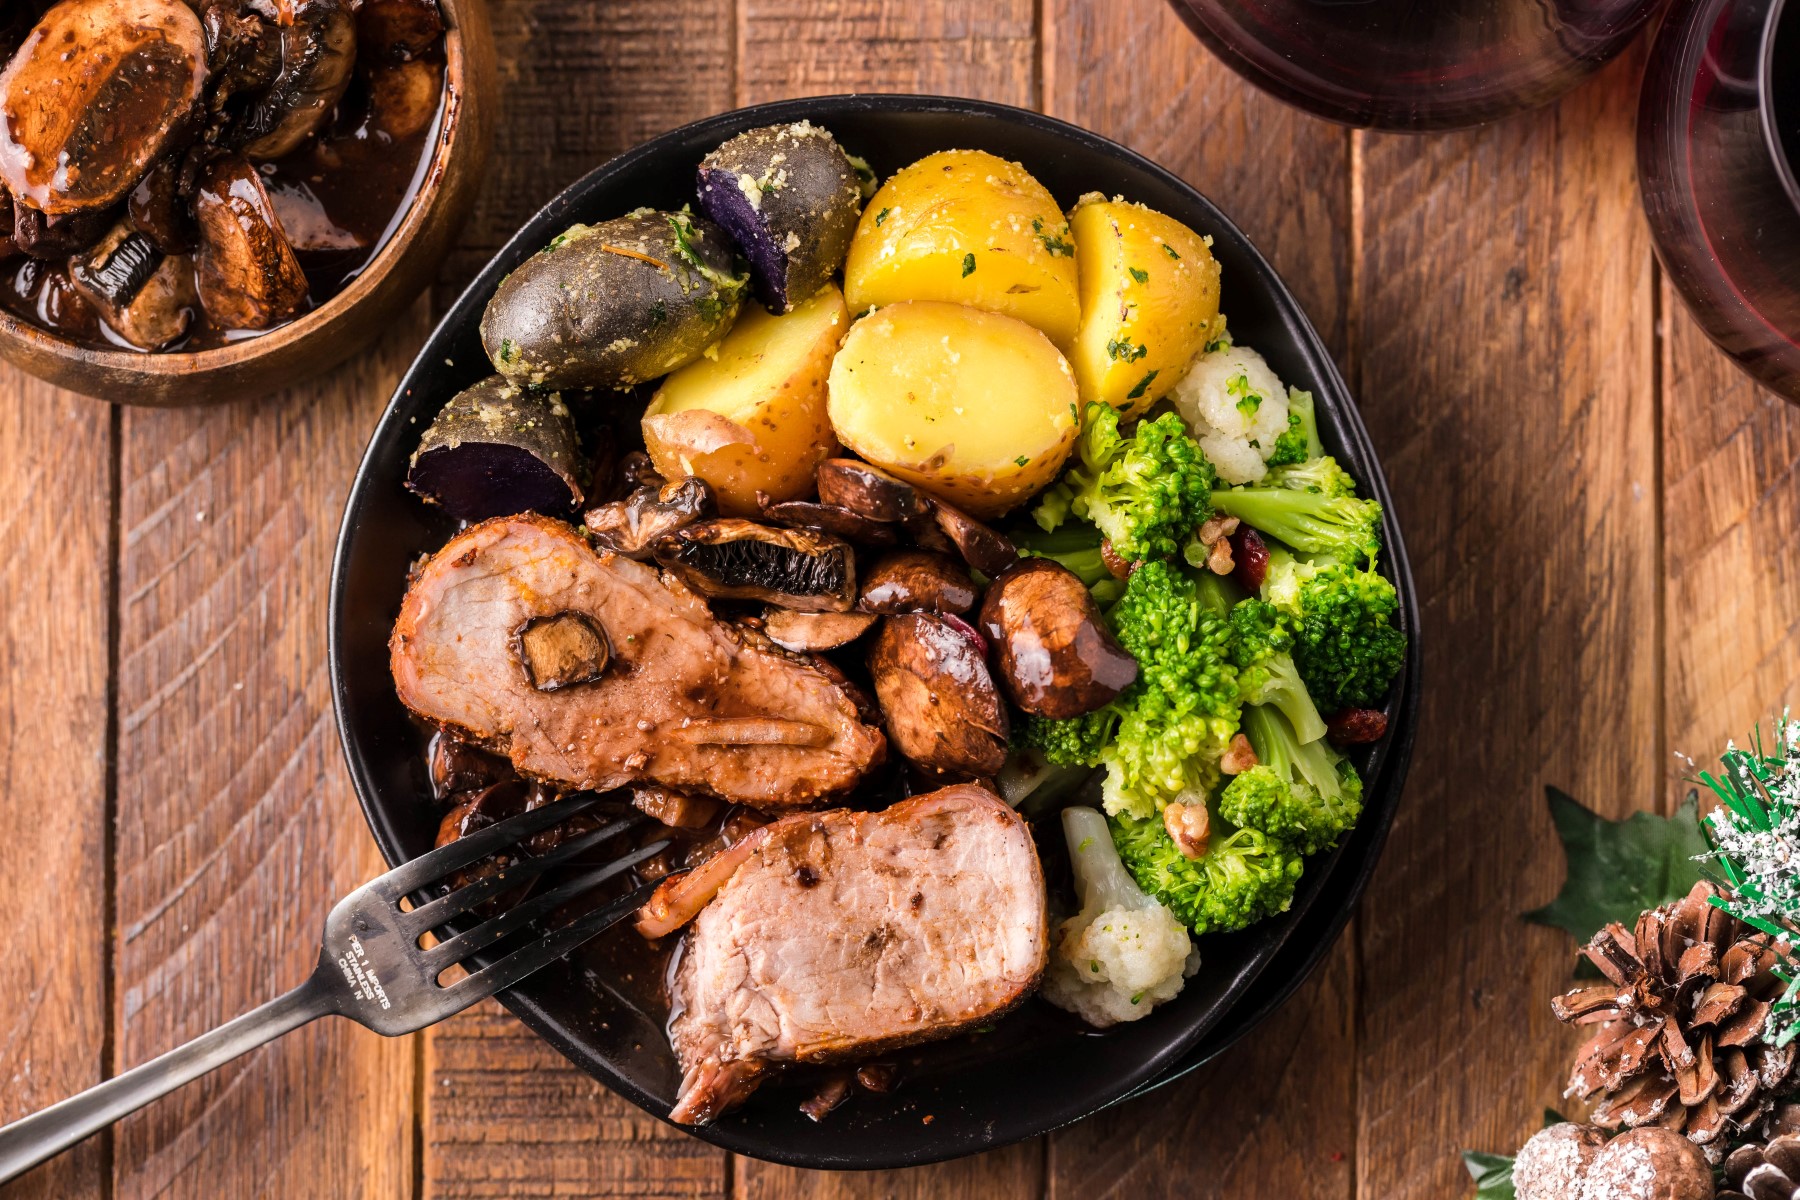 A plate of sliced grilled pork tenderloin served with roast potatoes, broccoli and cauliflower.